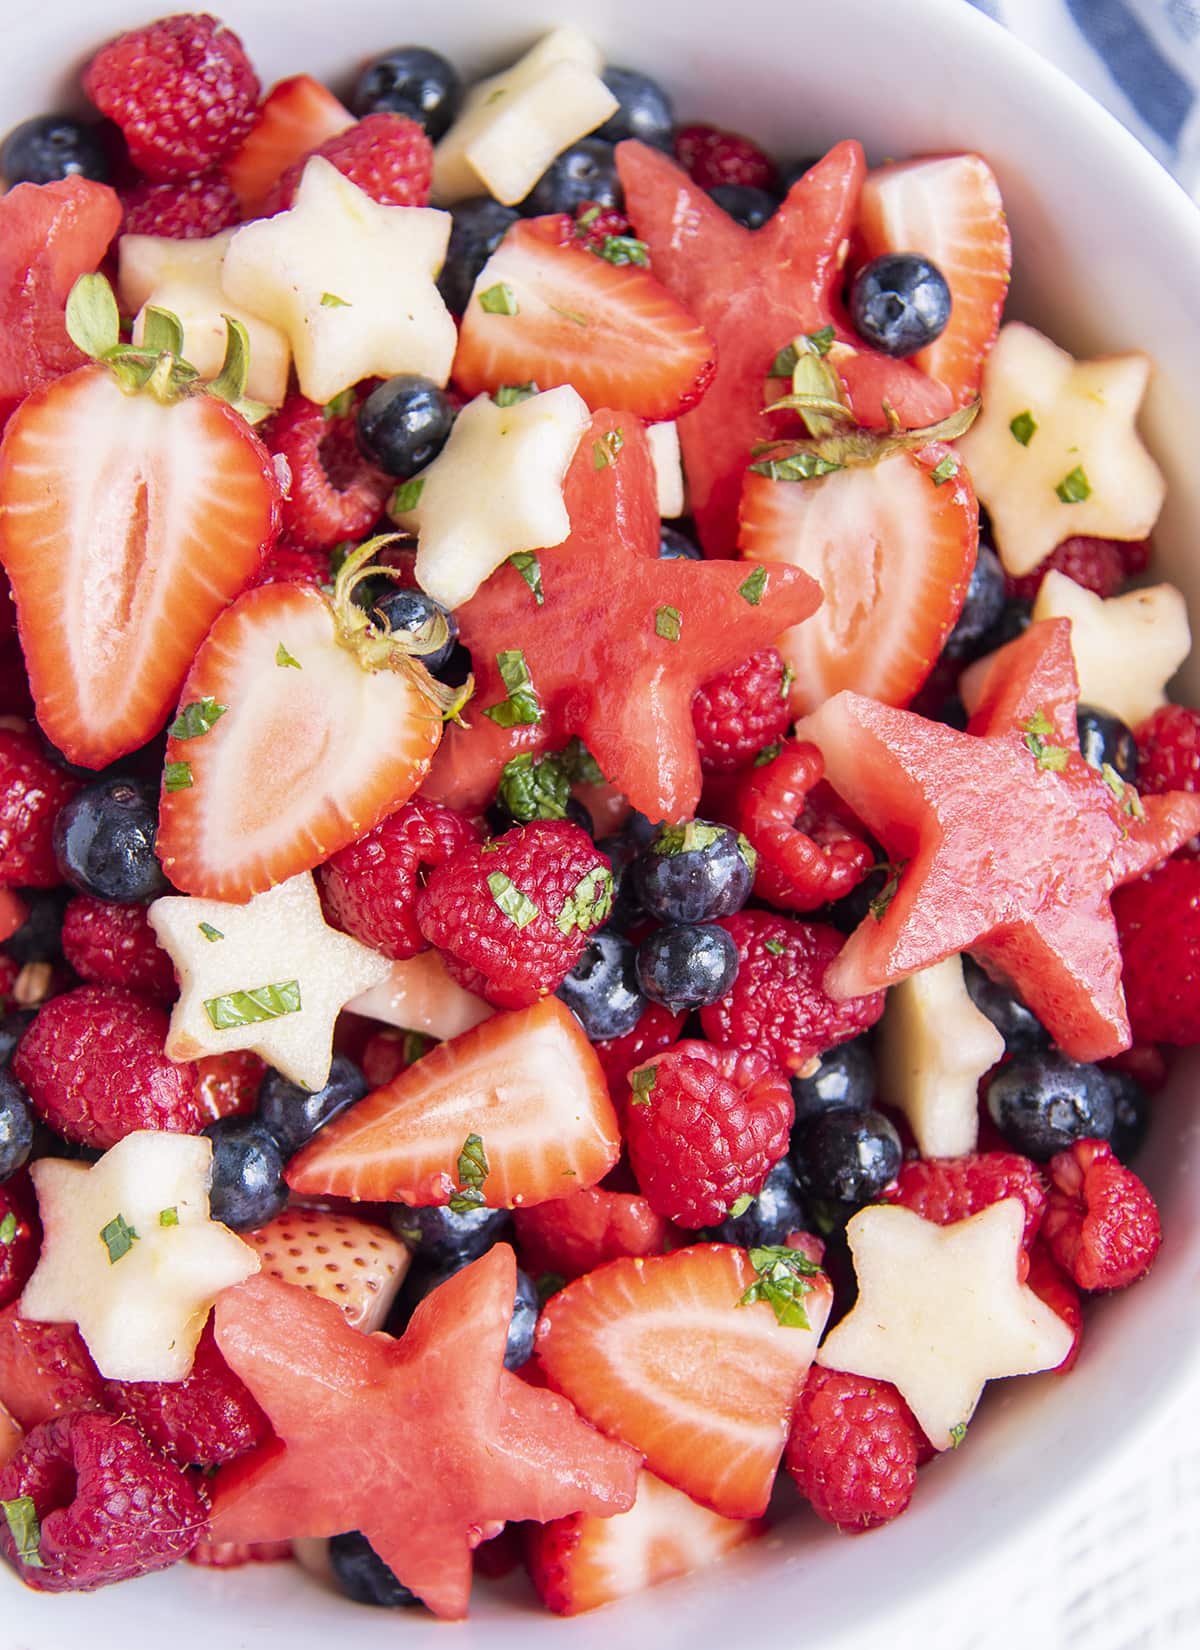 A bowl of red, white, and blue fruit salad with apple, and watermelon stars.